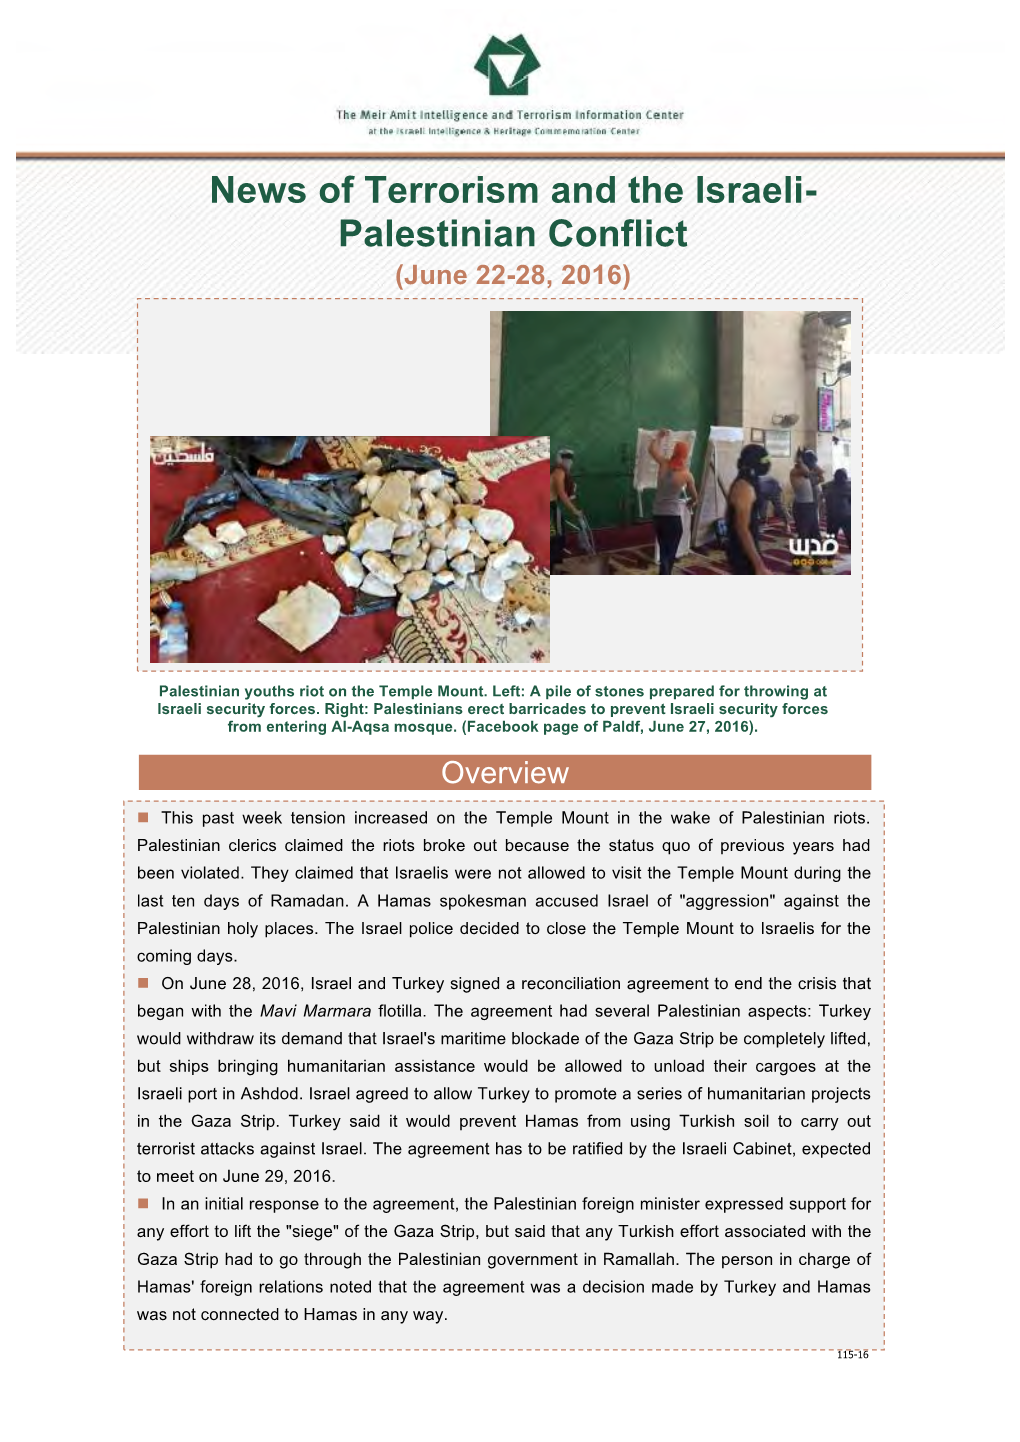 News of Terrorism and the Israeli-Palestinian Conflict (June 22